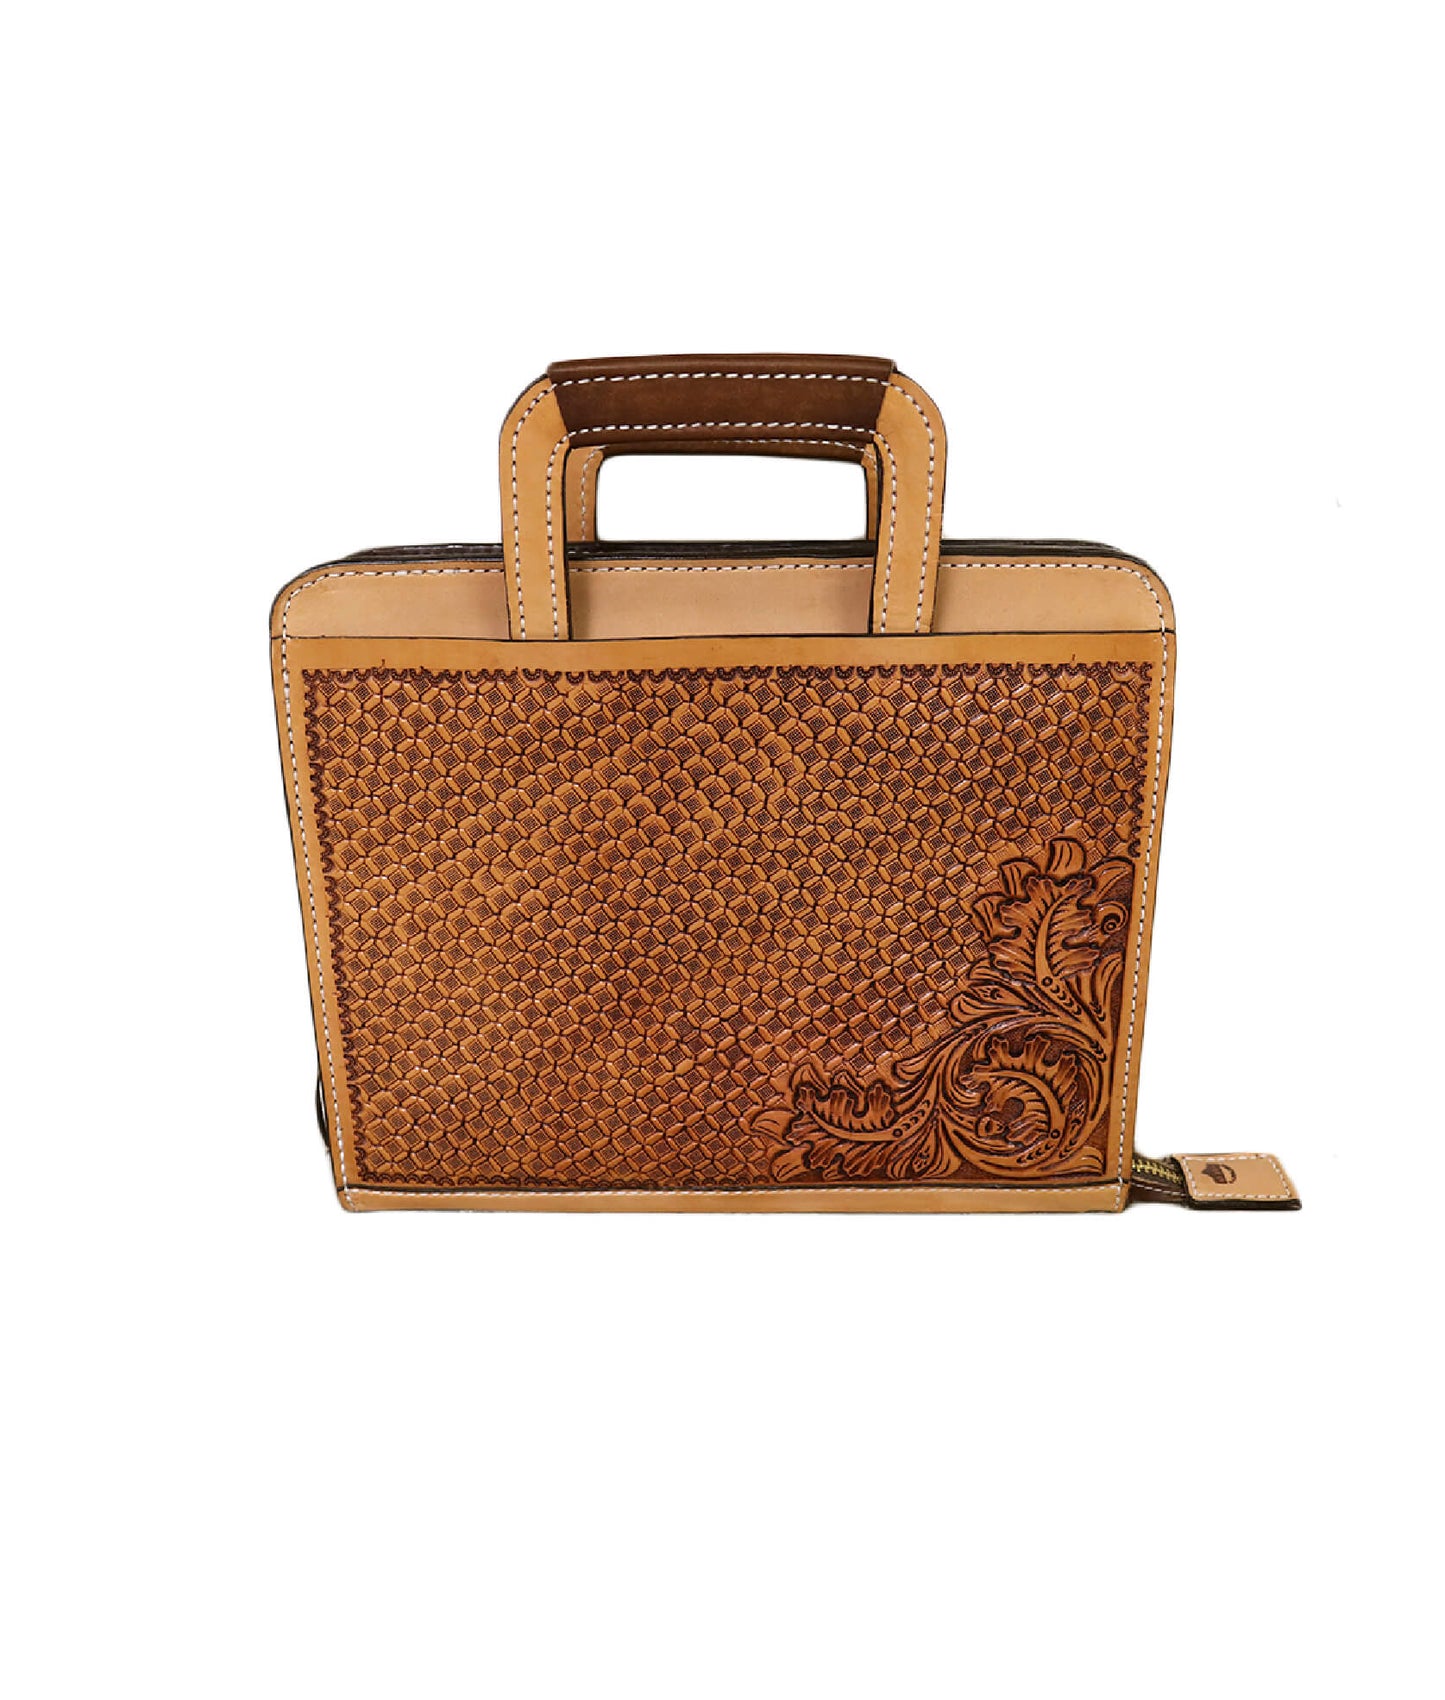 Cowboy Briefcase golden and chocolate leather waffle and oak leaf tooling